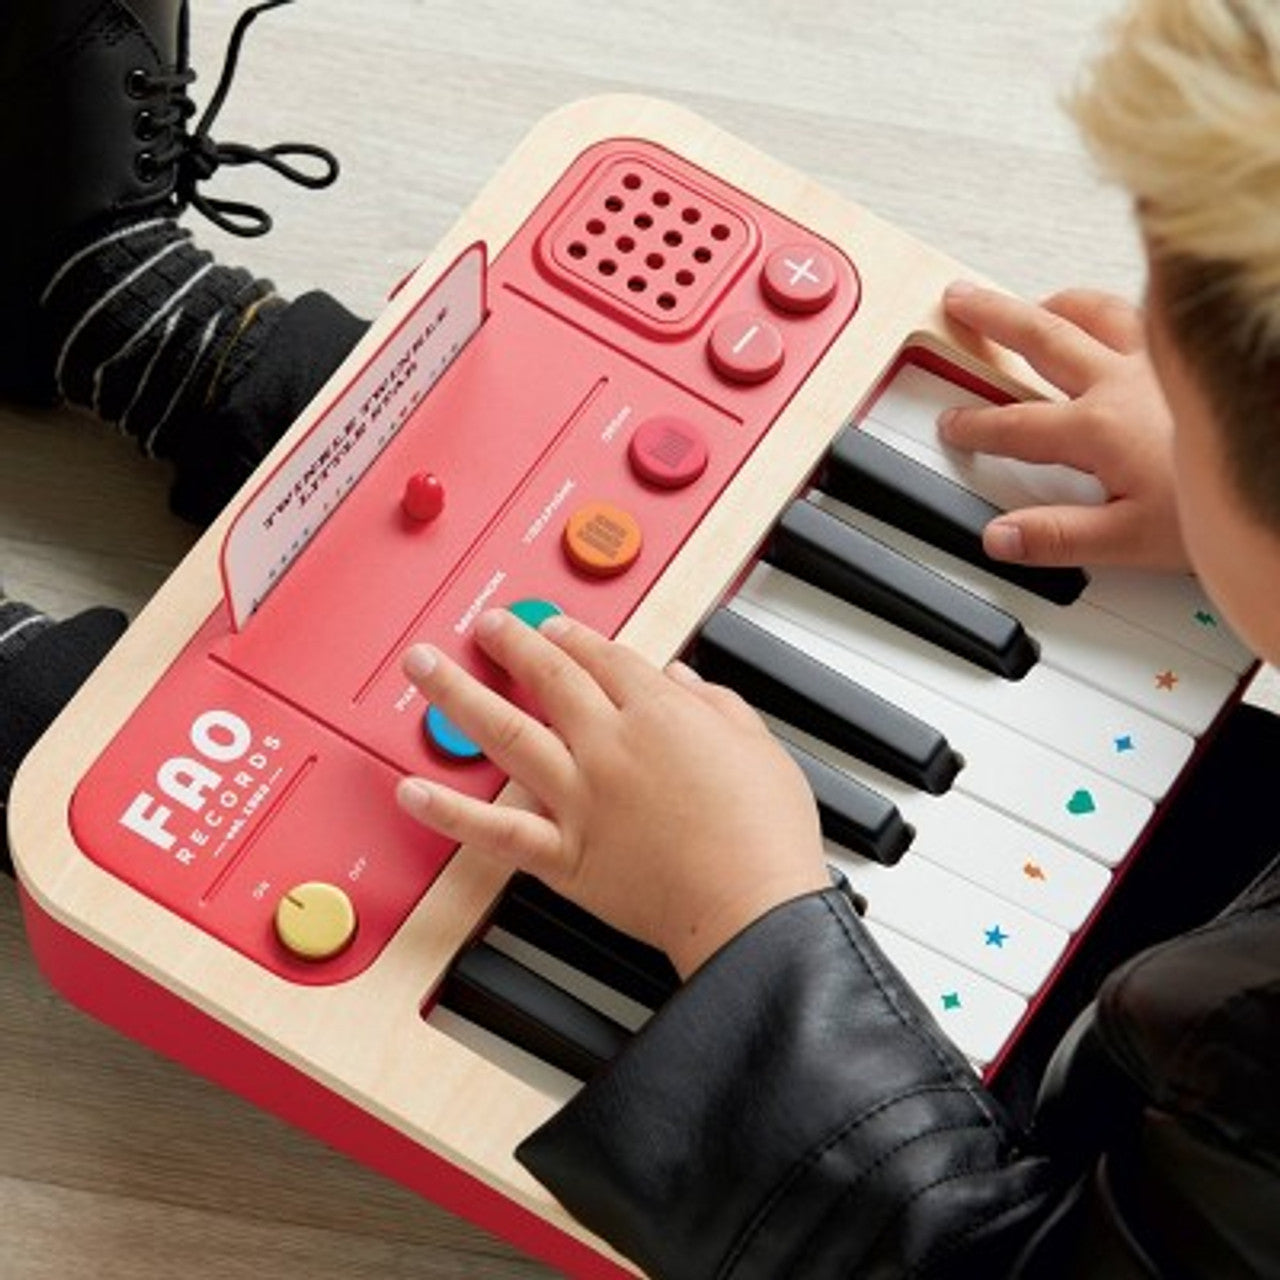 New FAO Schwarz Stage Stars Portable Piano and Synthesizer